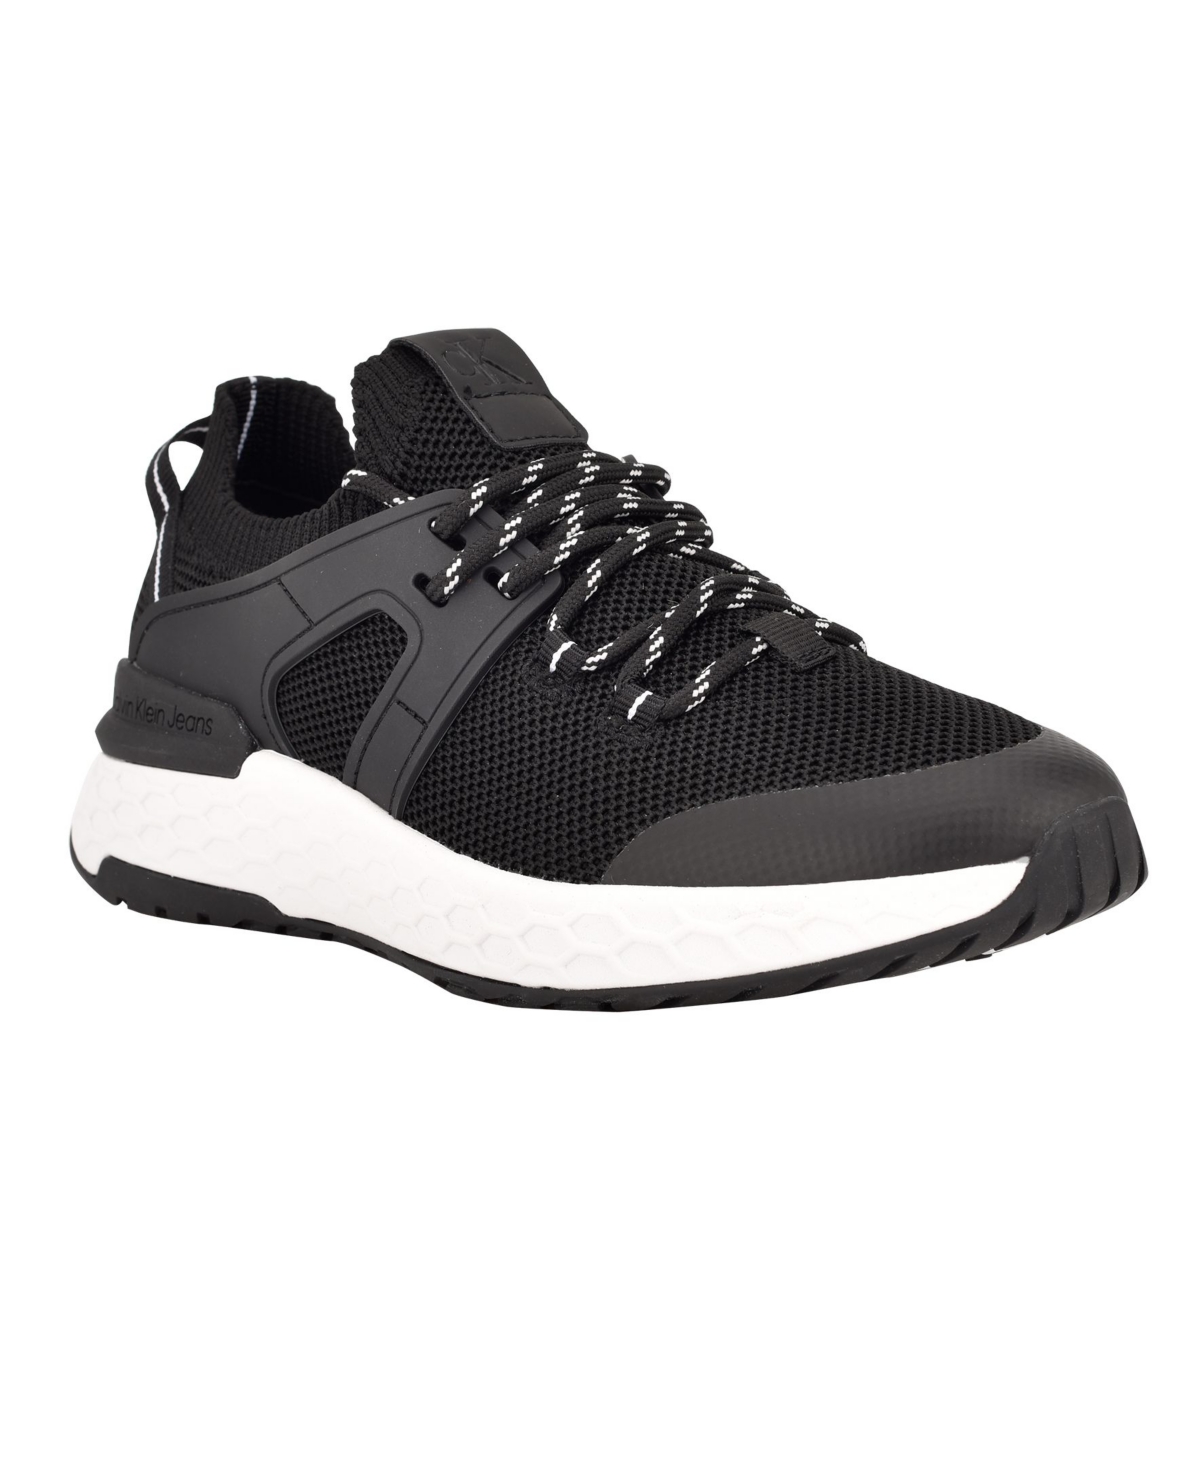 UPC 195972002289 product image for Calvin Klein Women's Aleah Lace-Up Sneakers Women's Shoes | upcitemdb.com